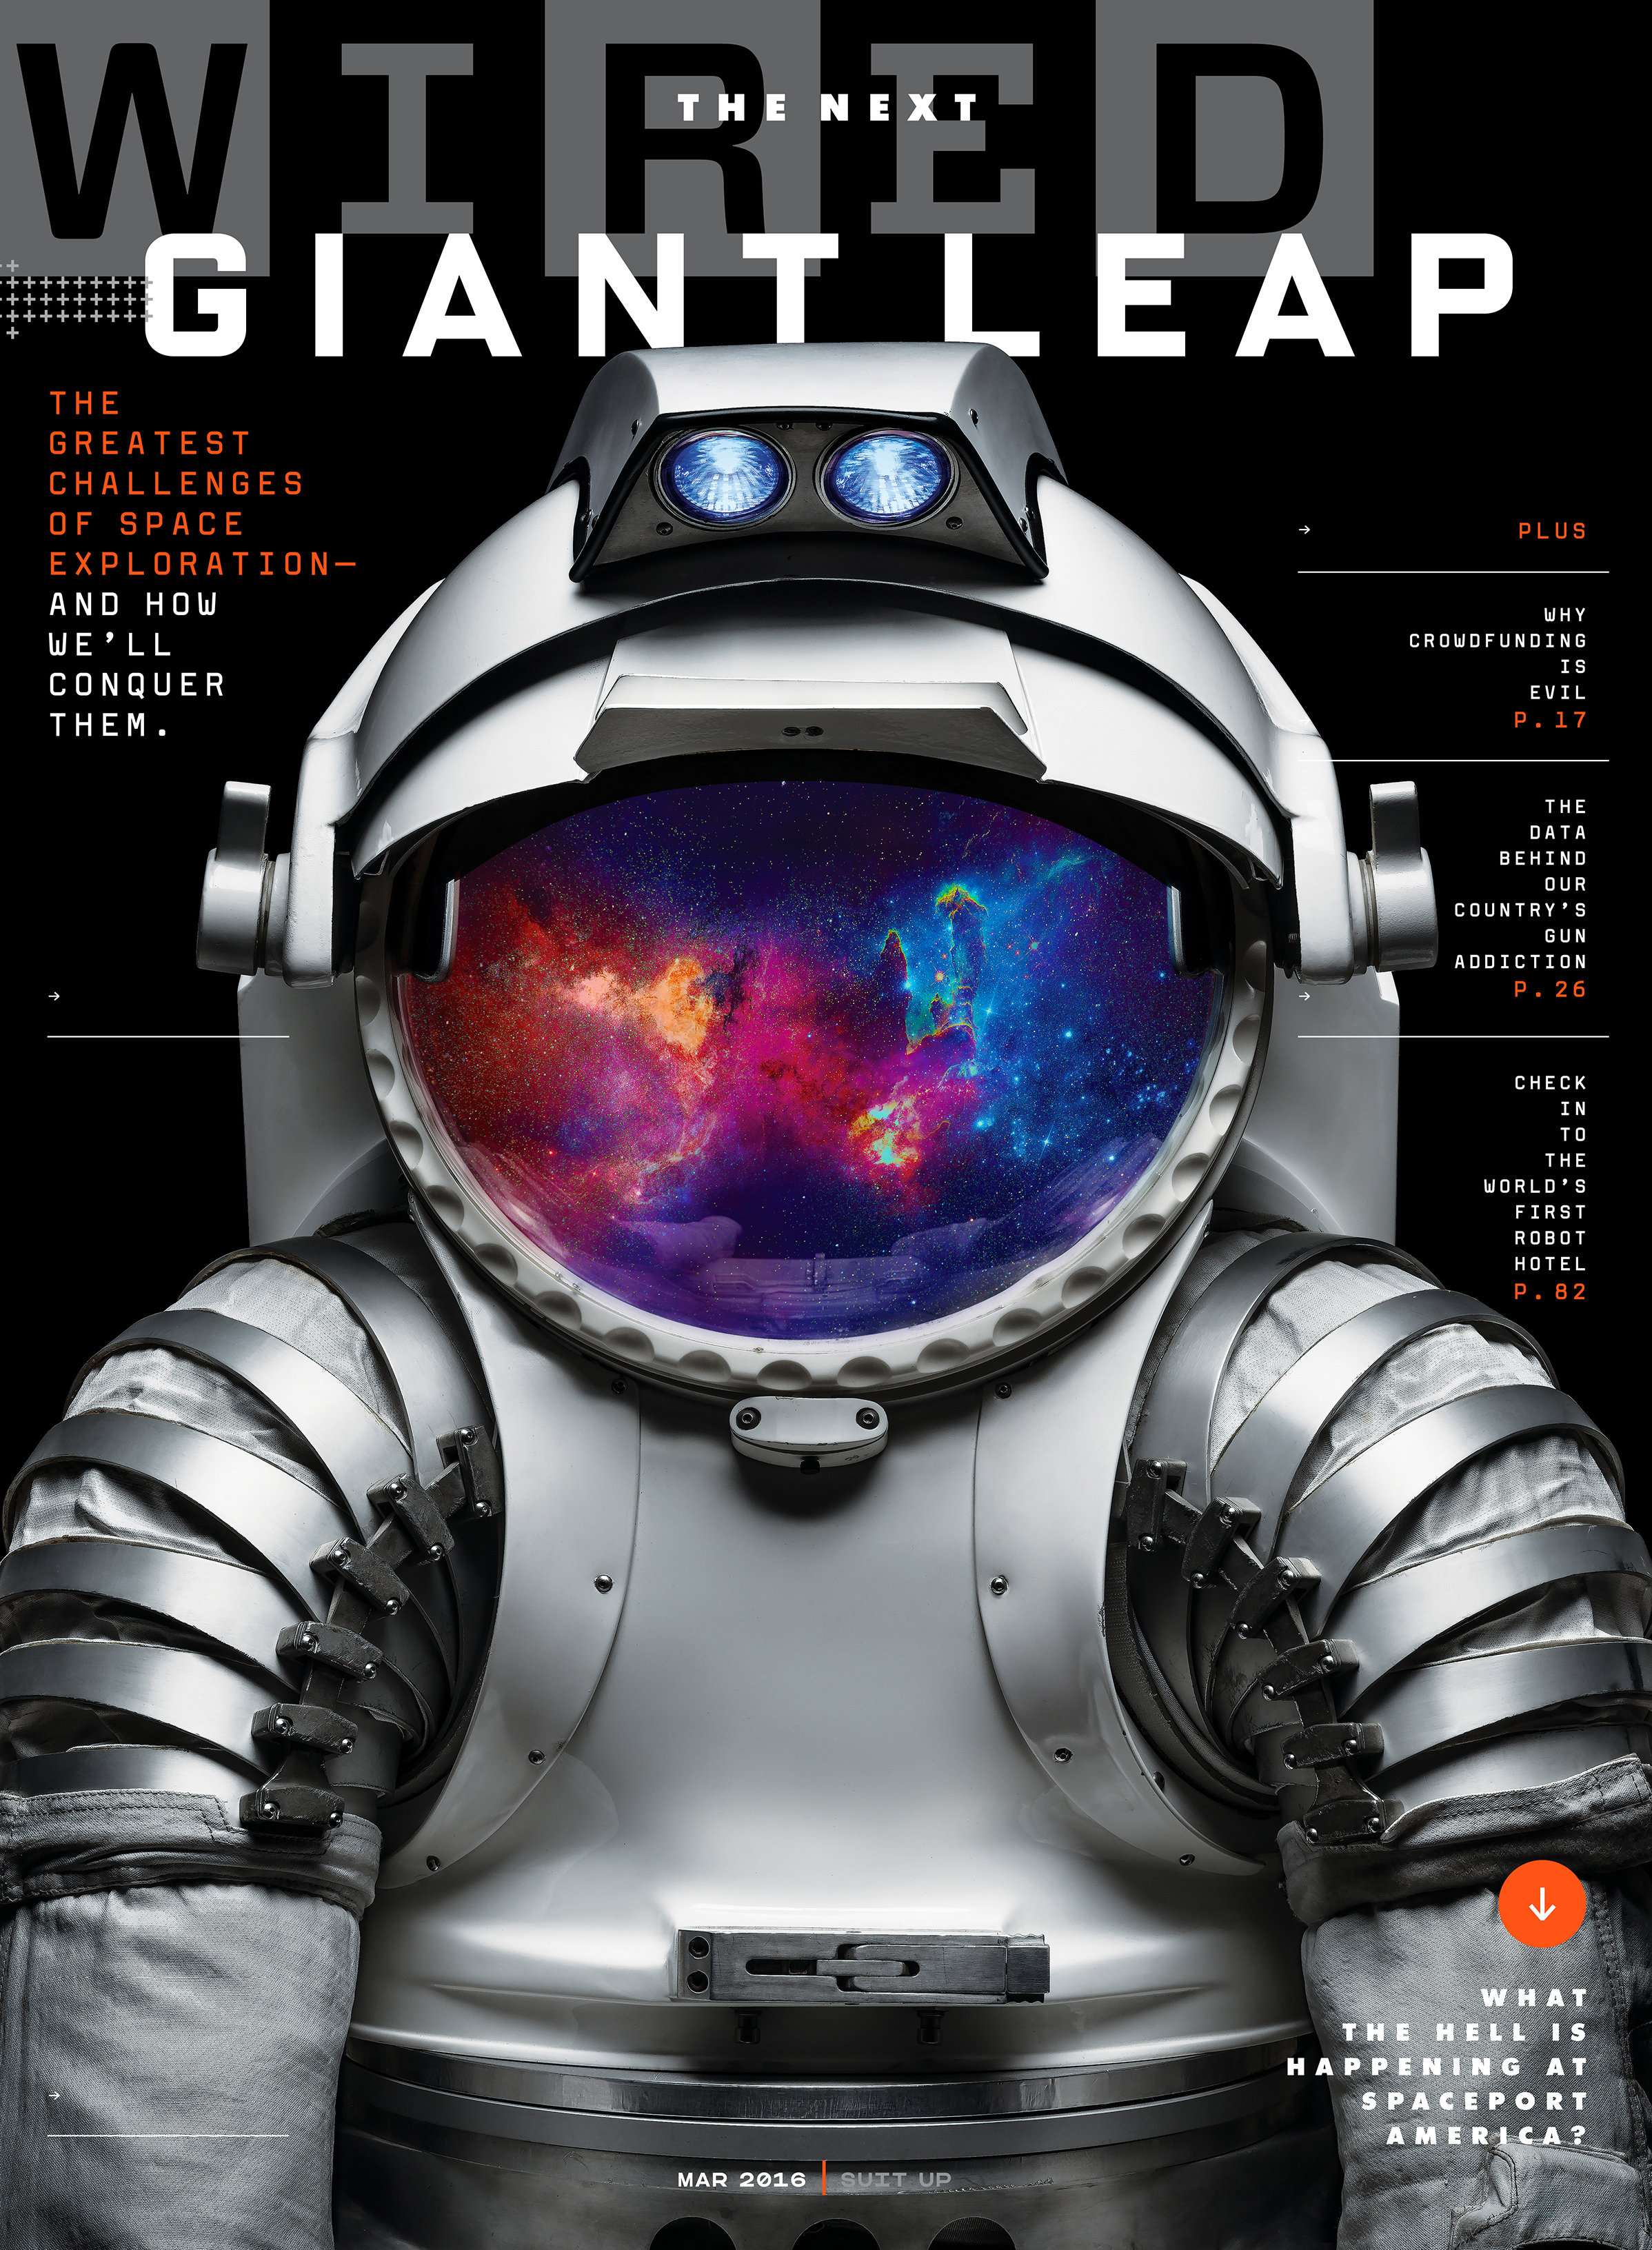 WIRED - "The Next Giant Leap," March